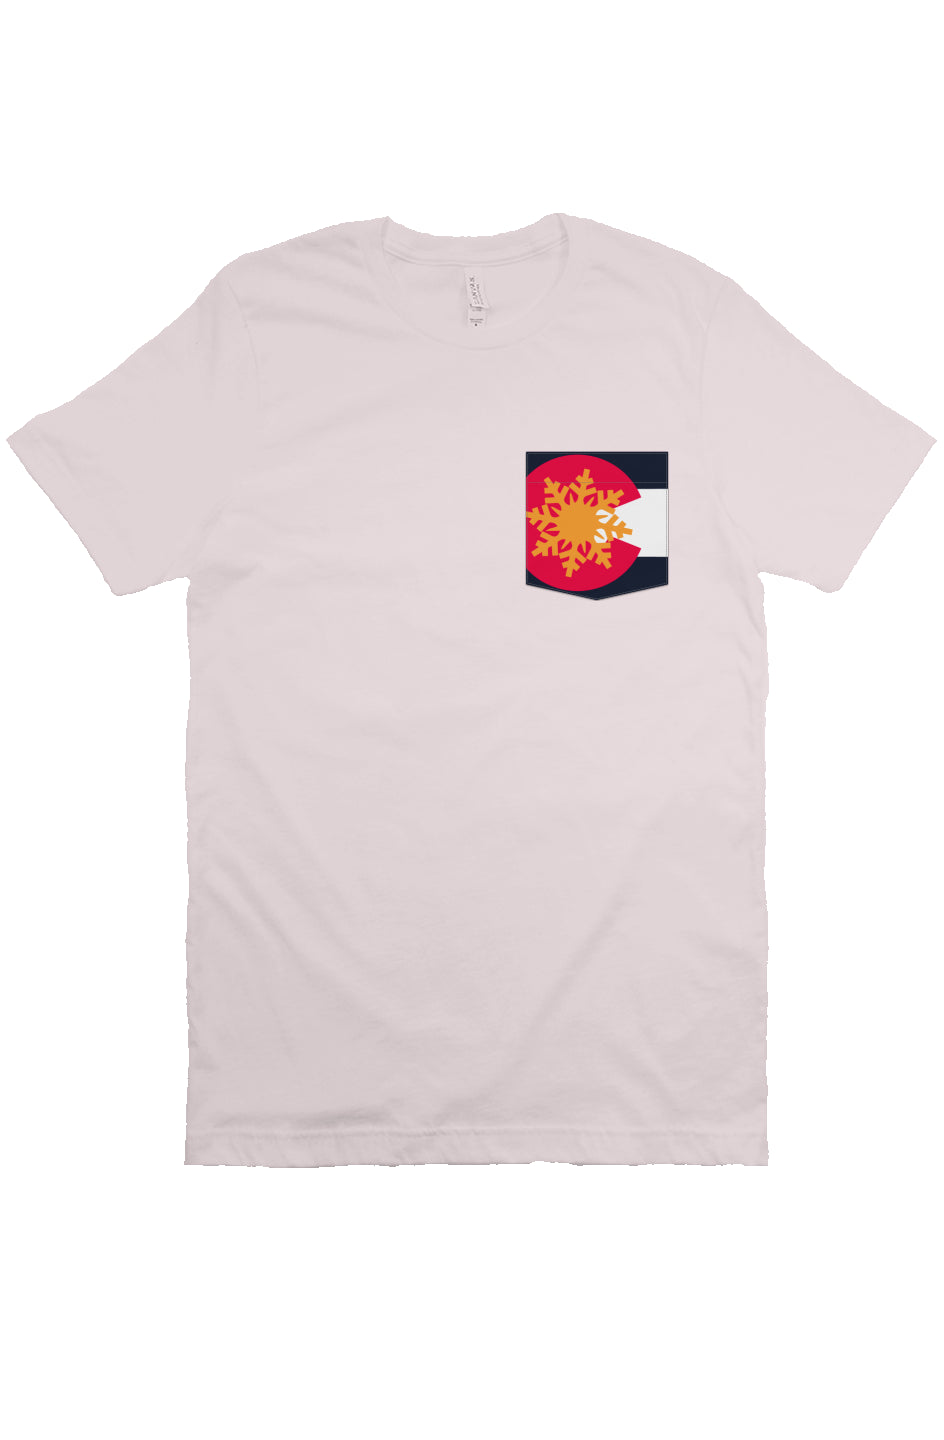 Odyssey T-Shirt = Colorado Style = Pink Shell